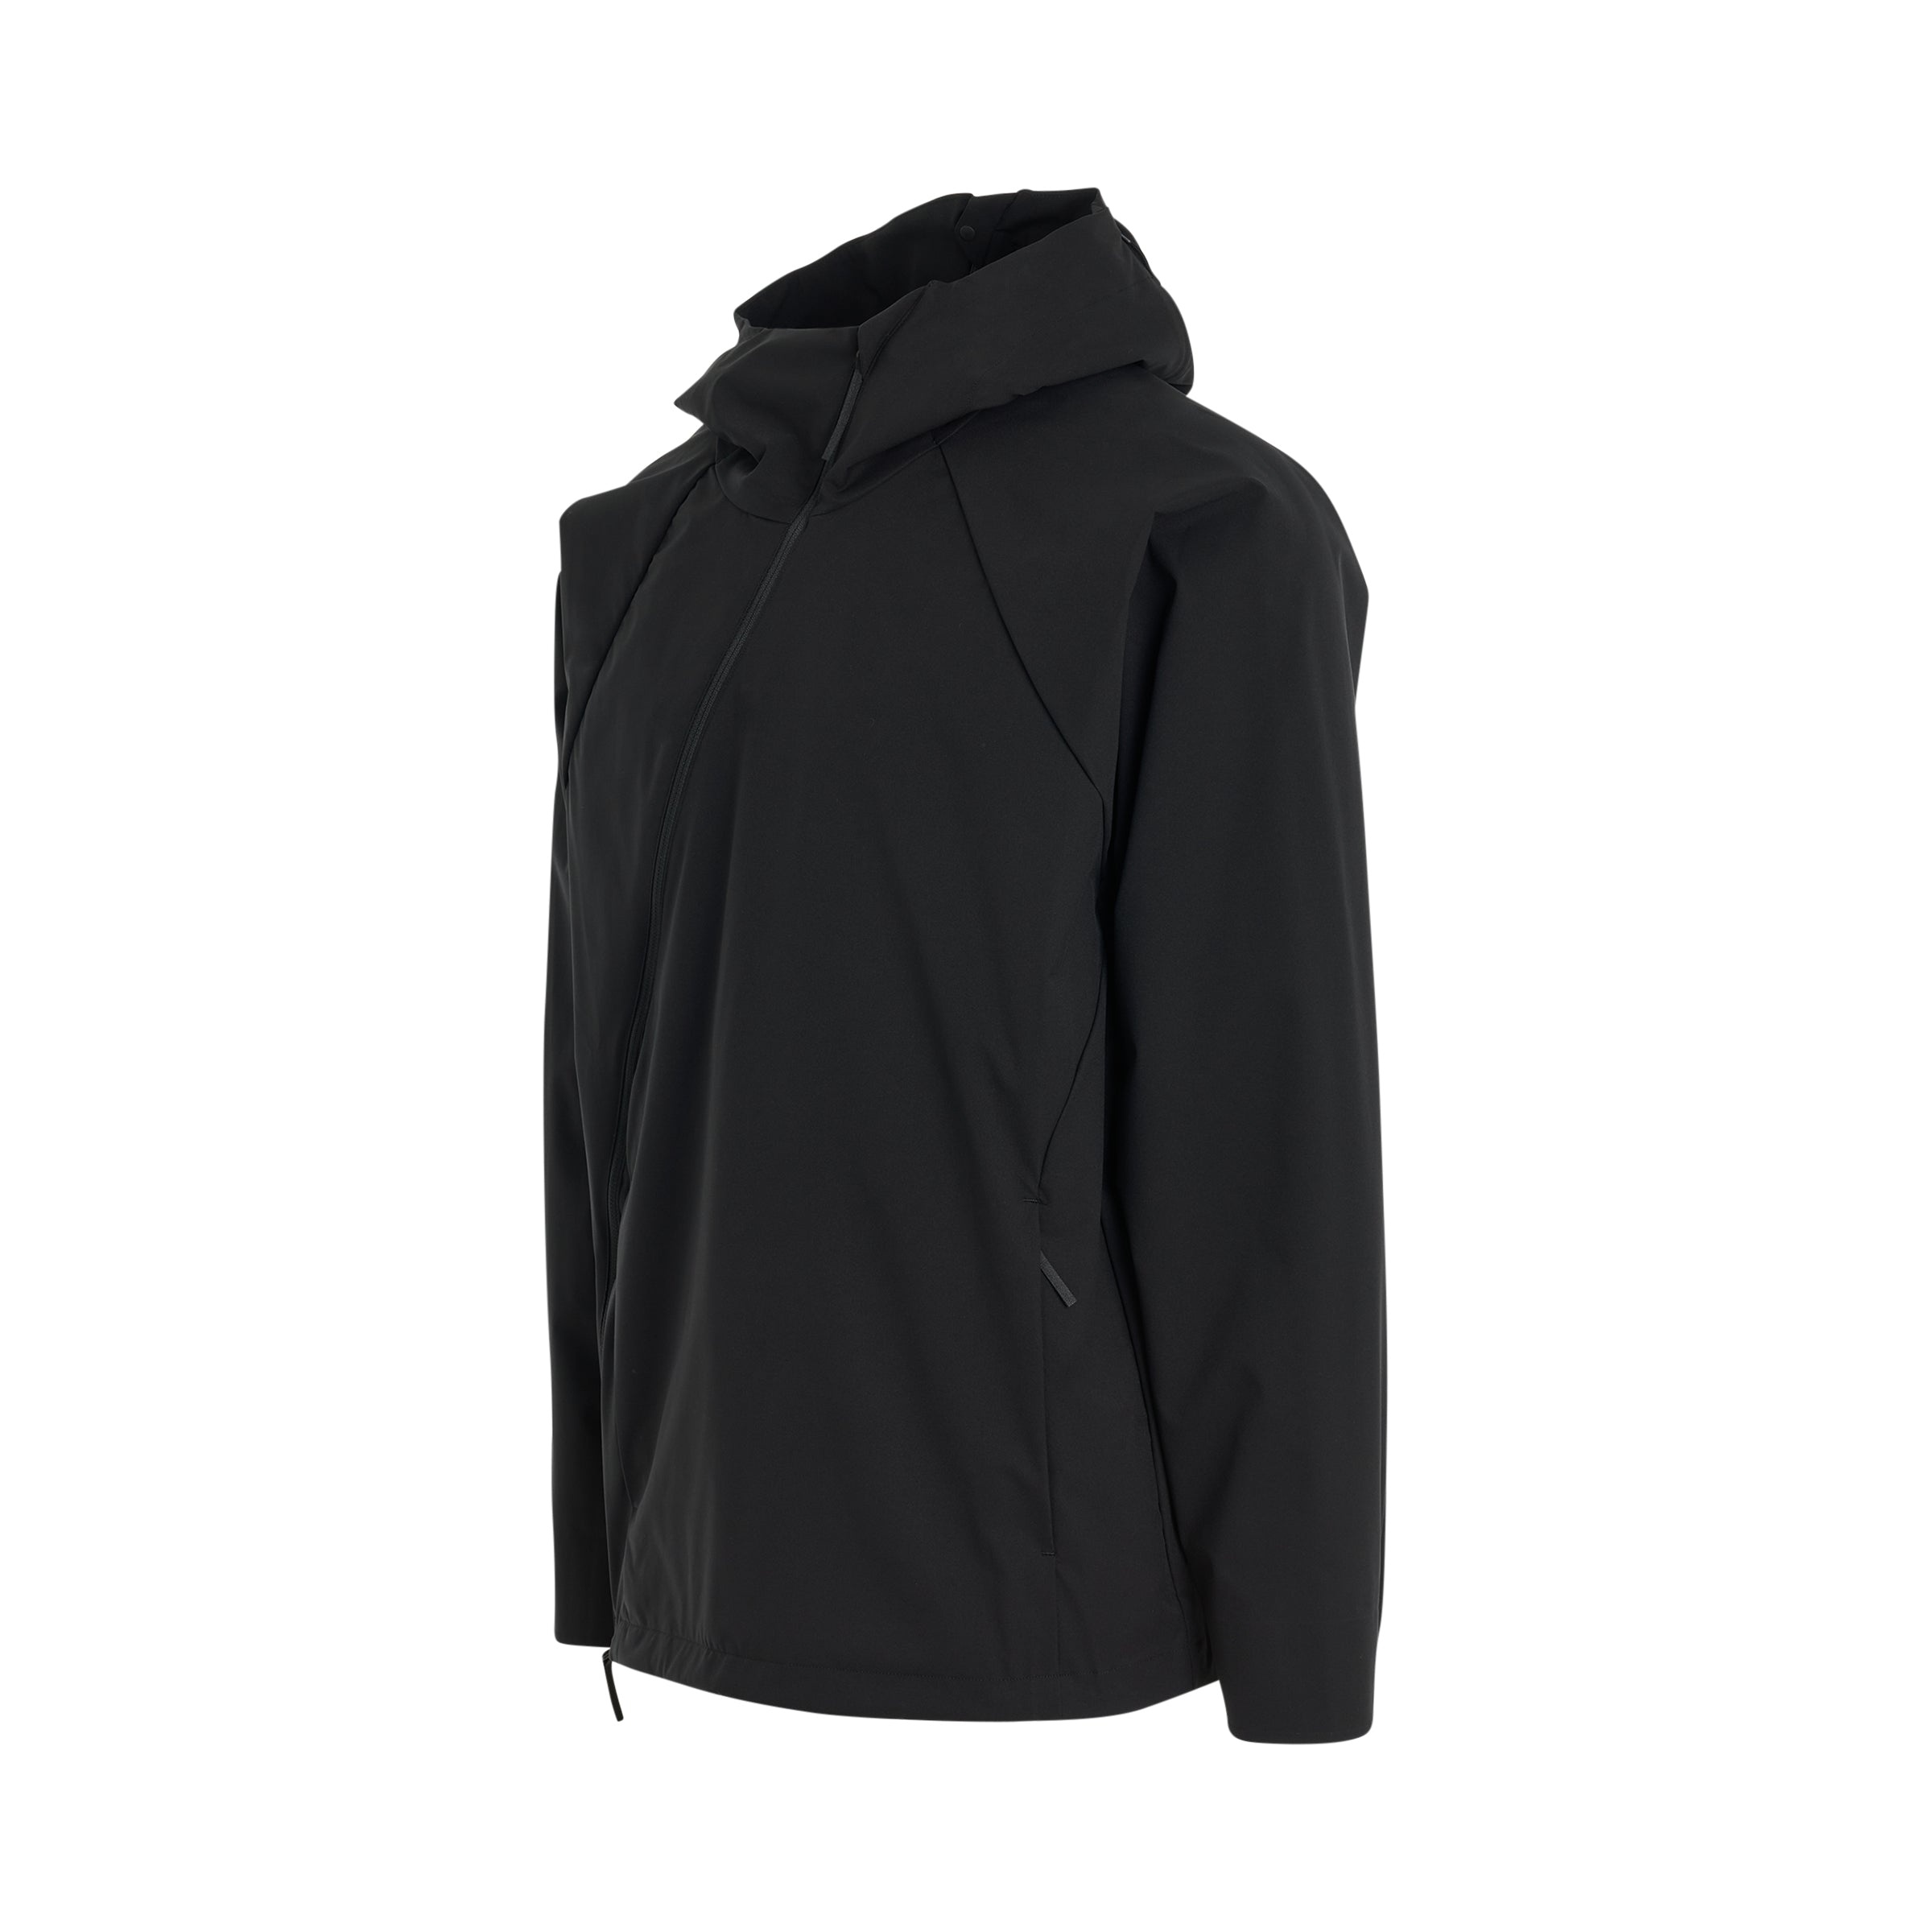 6.0 Technical Jacket (Center) in Black - 2